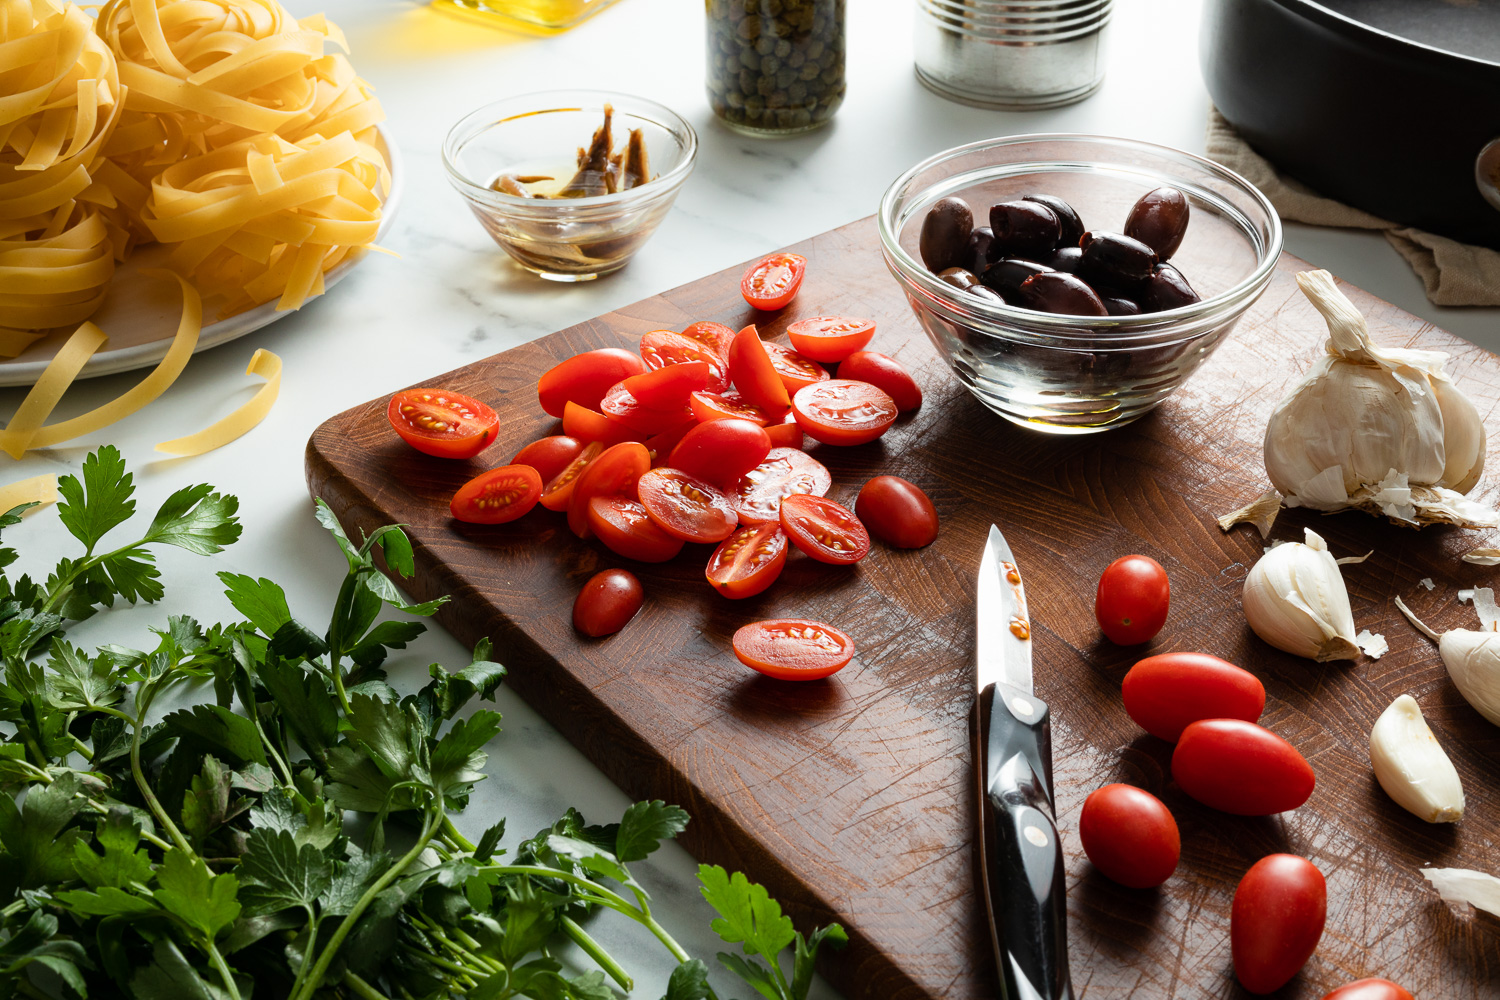 tomatoes, olives, garlic, and a paring knife on a cutting board with parsley and pasta